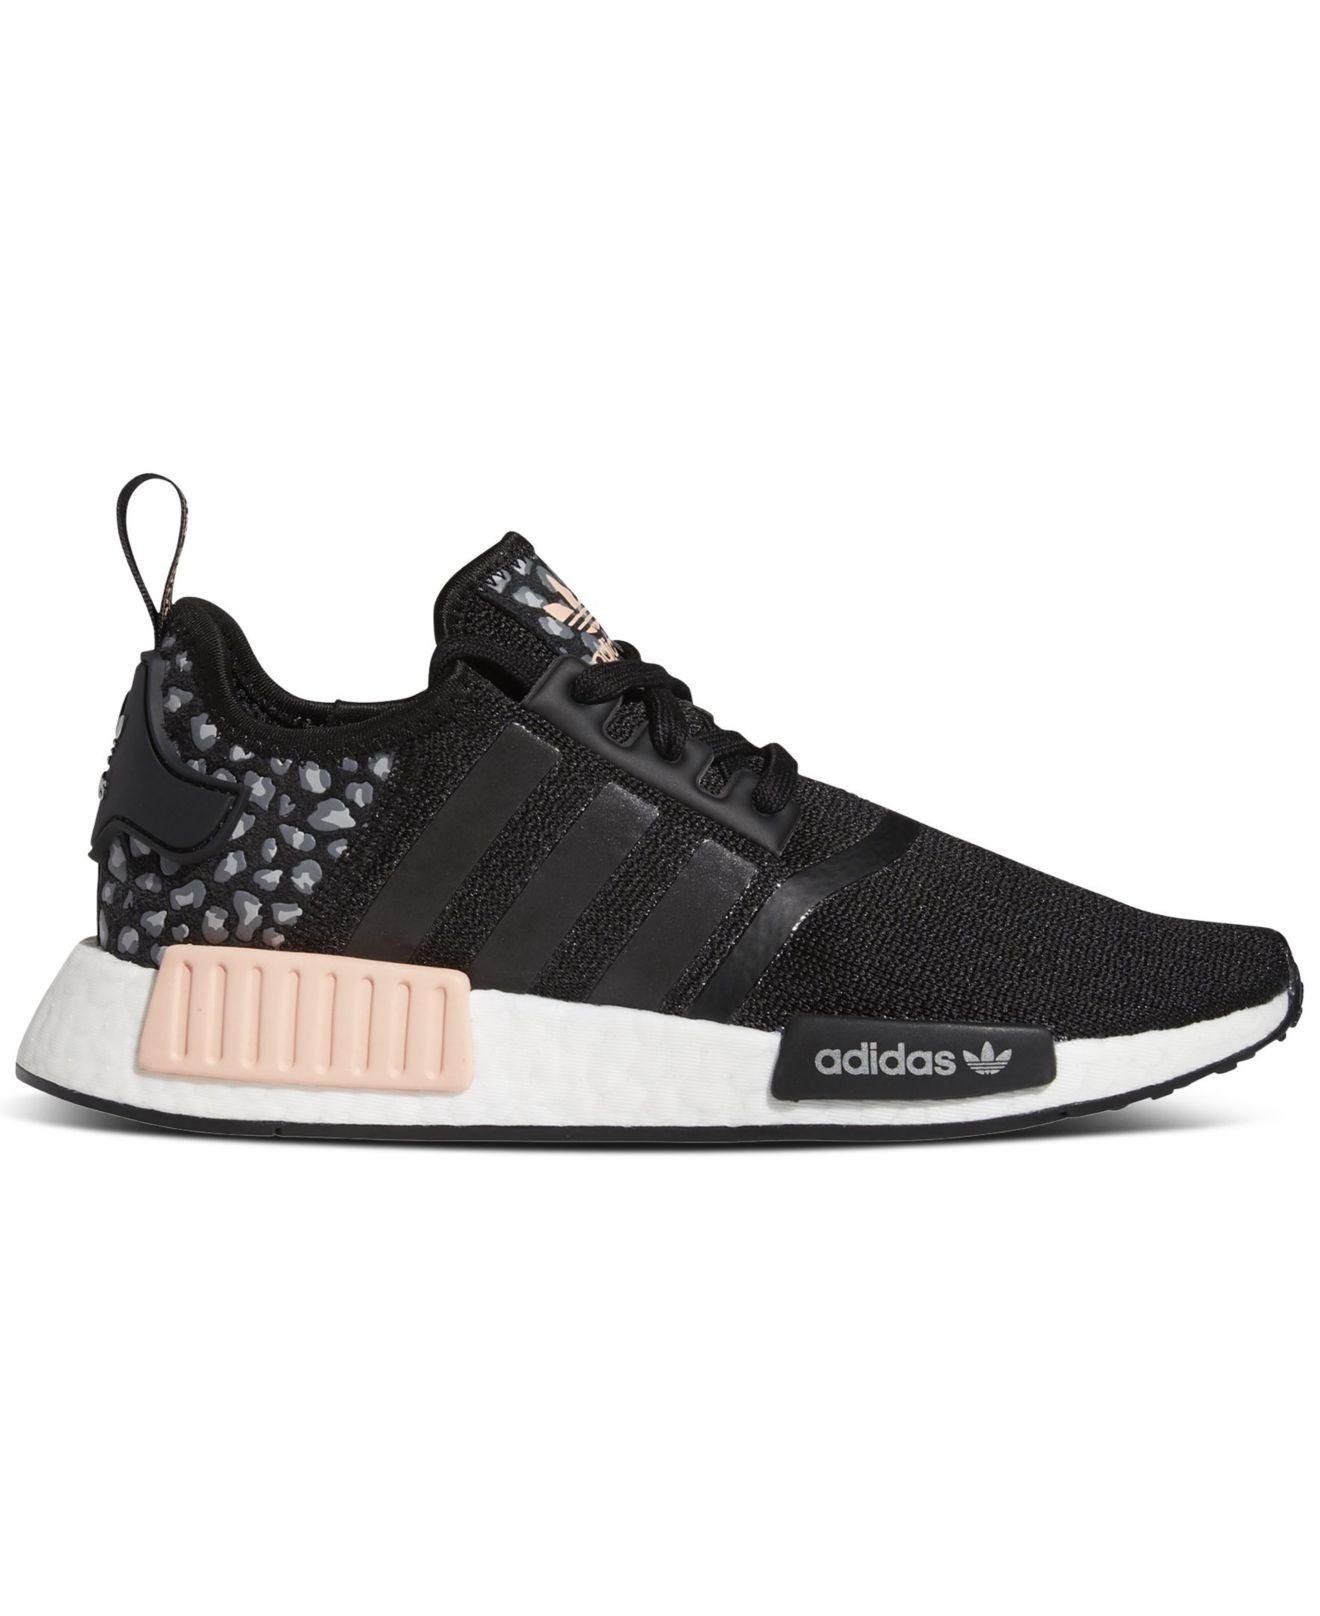 adidas Nmd R1 Animal Print Casual Sneakers From Finish Line in Black | Lyst